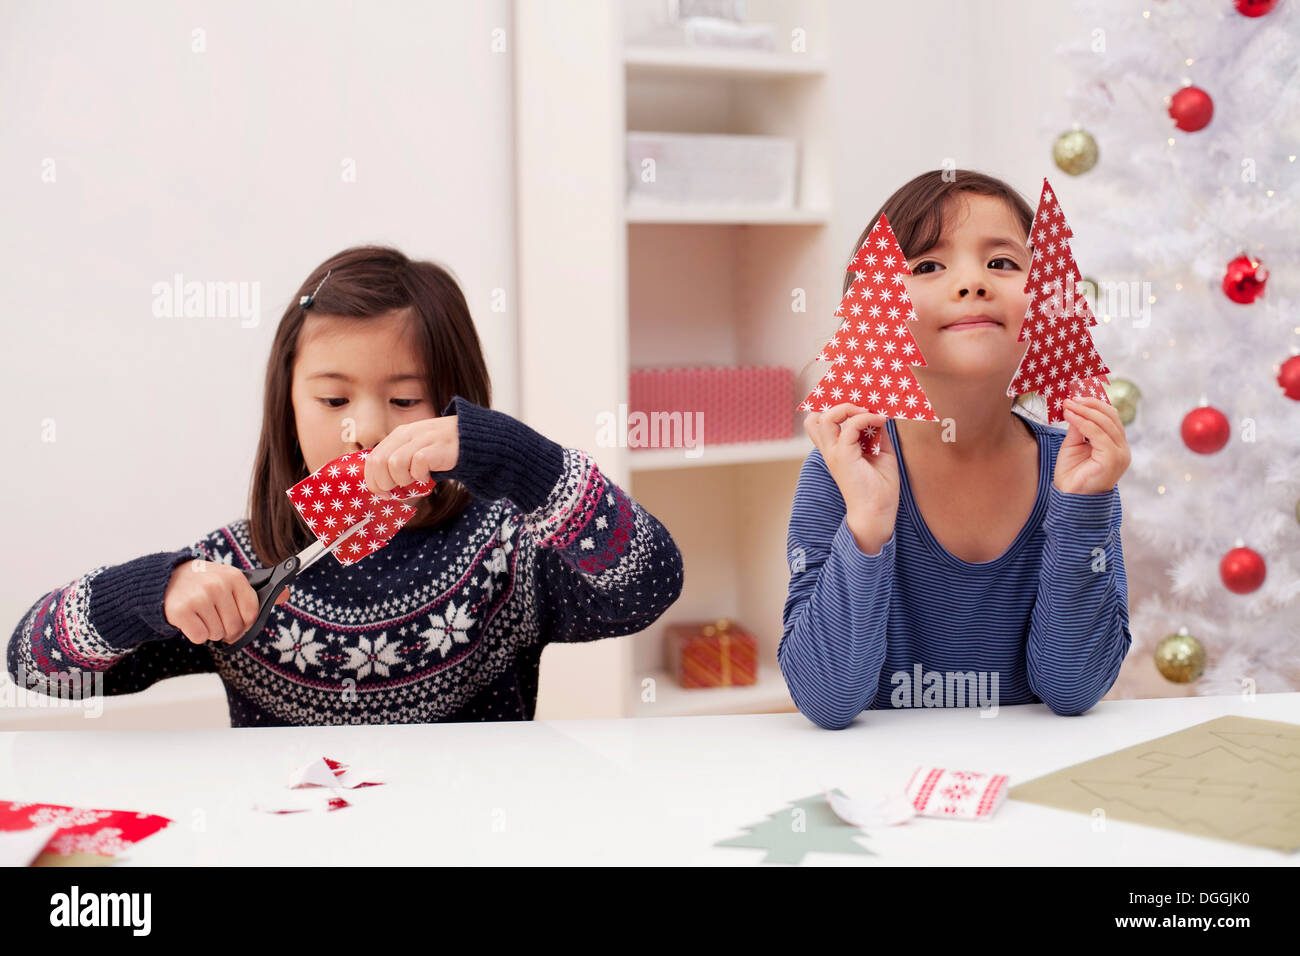 Girls holding and making Christmas decorations Stock Photo